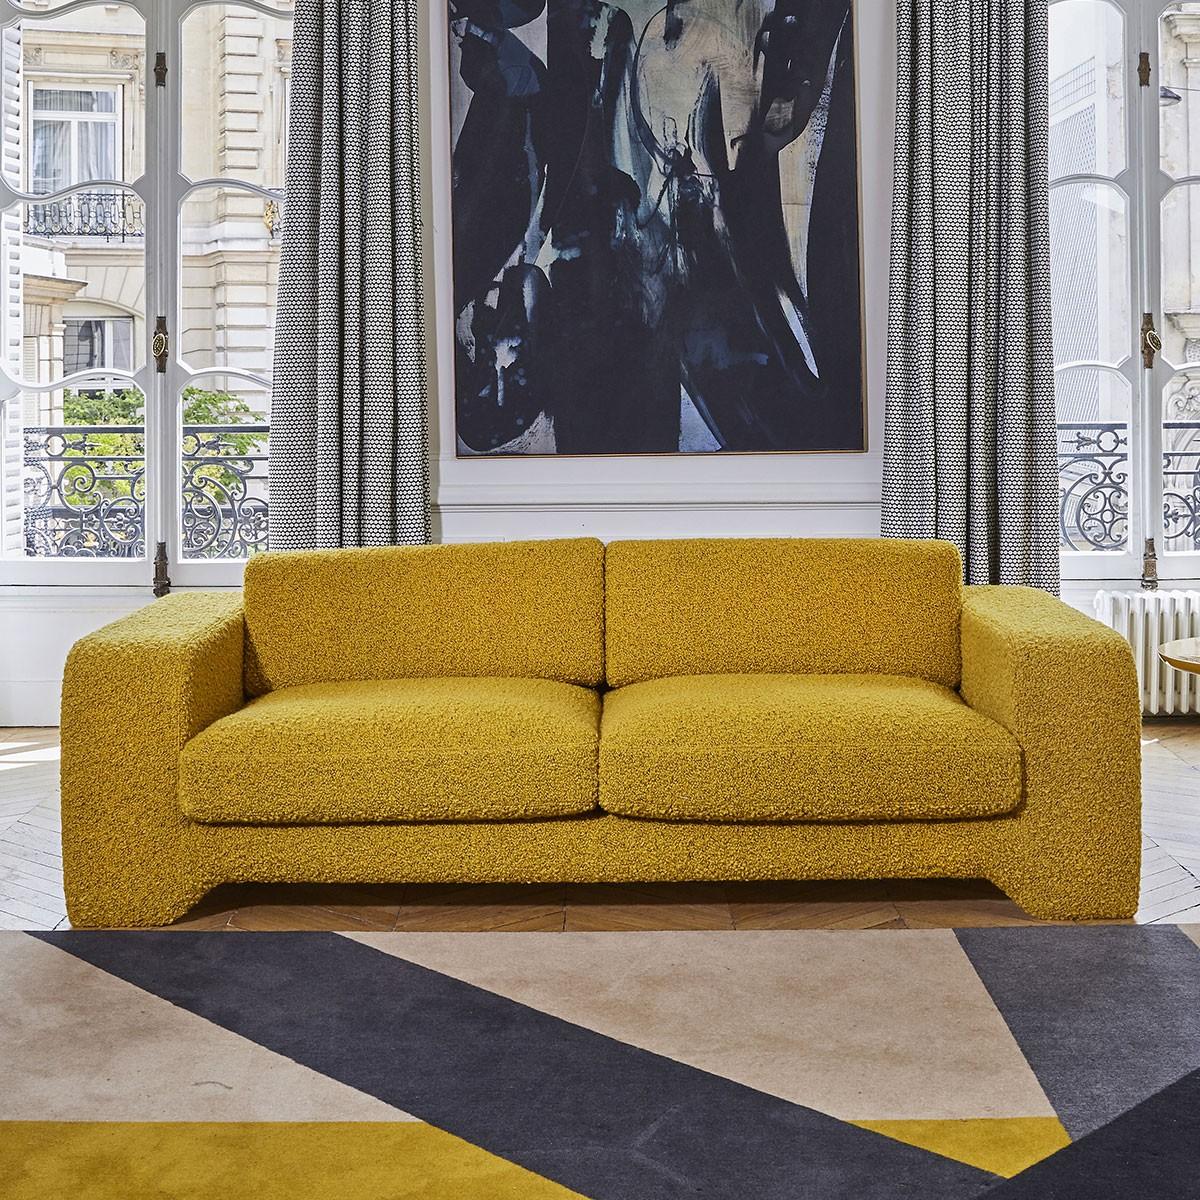 Popus Editions Giovanna 2.5 Seater Sofa in Ciotello Athena Loop Yarn Upholstery In New Condition For Sale In Paris, FR